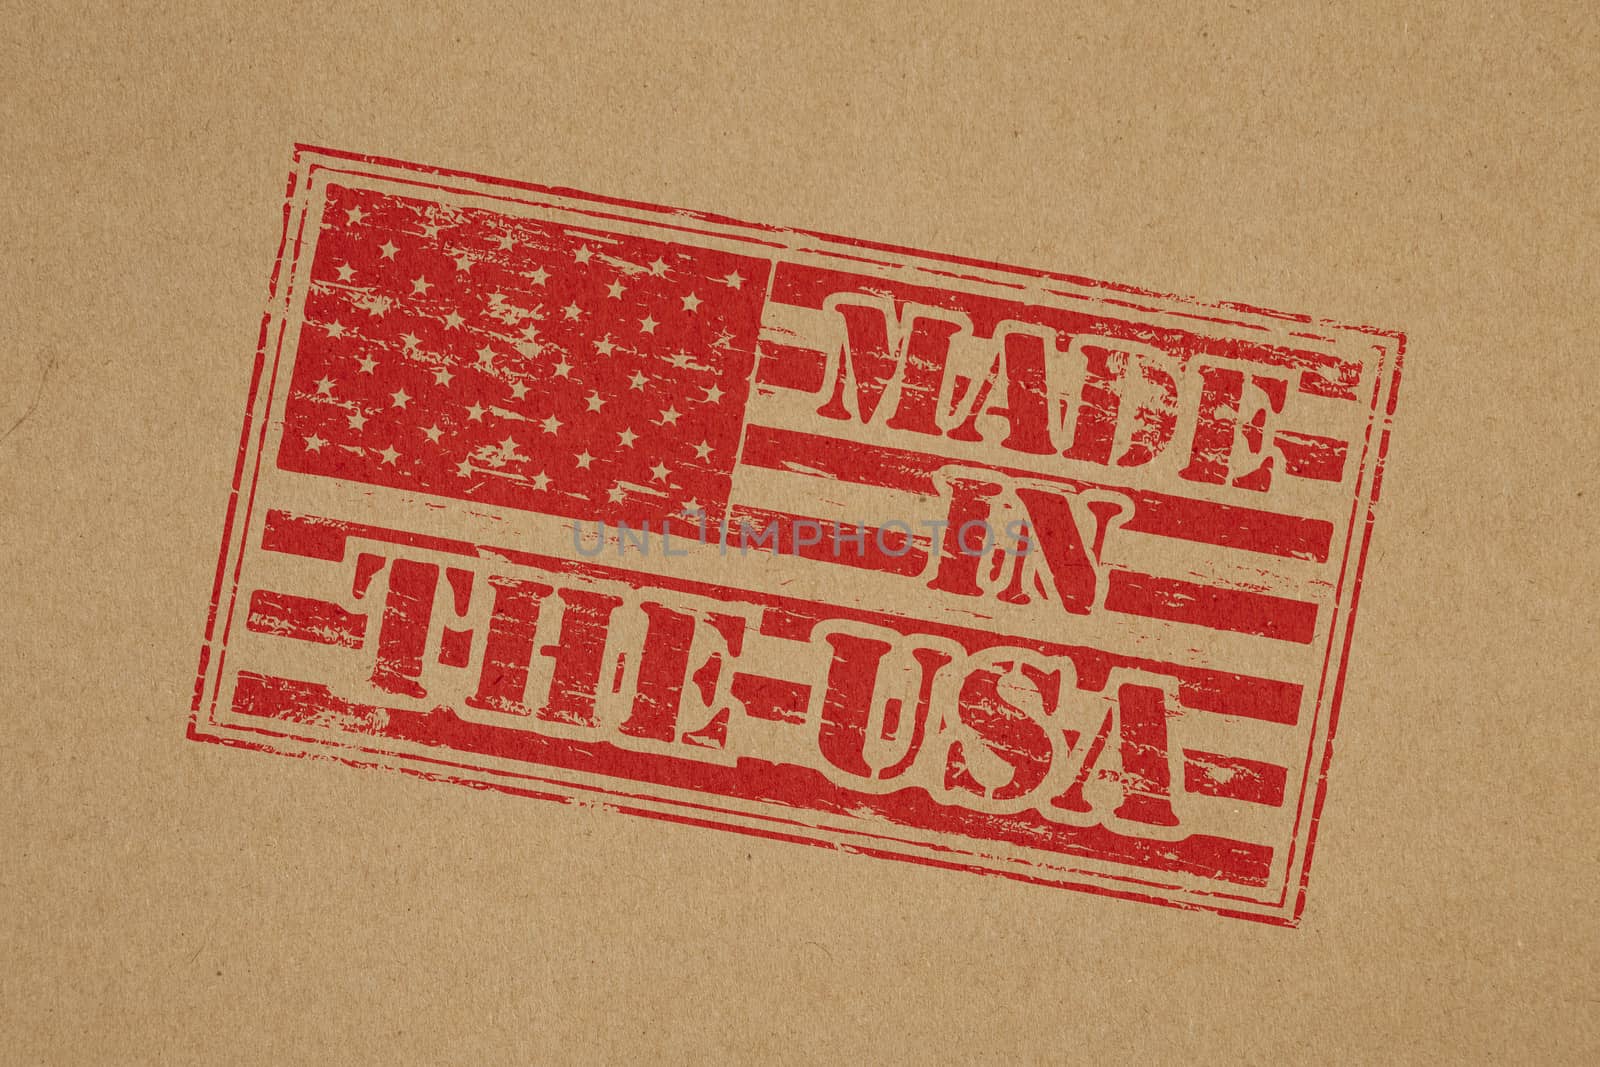 Made in the USA rubber stamp impression on brown paper background
